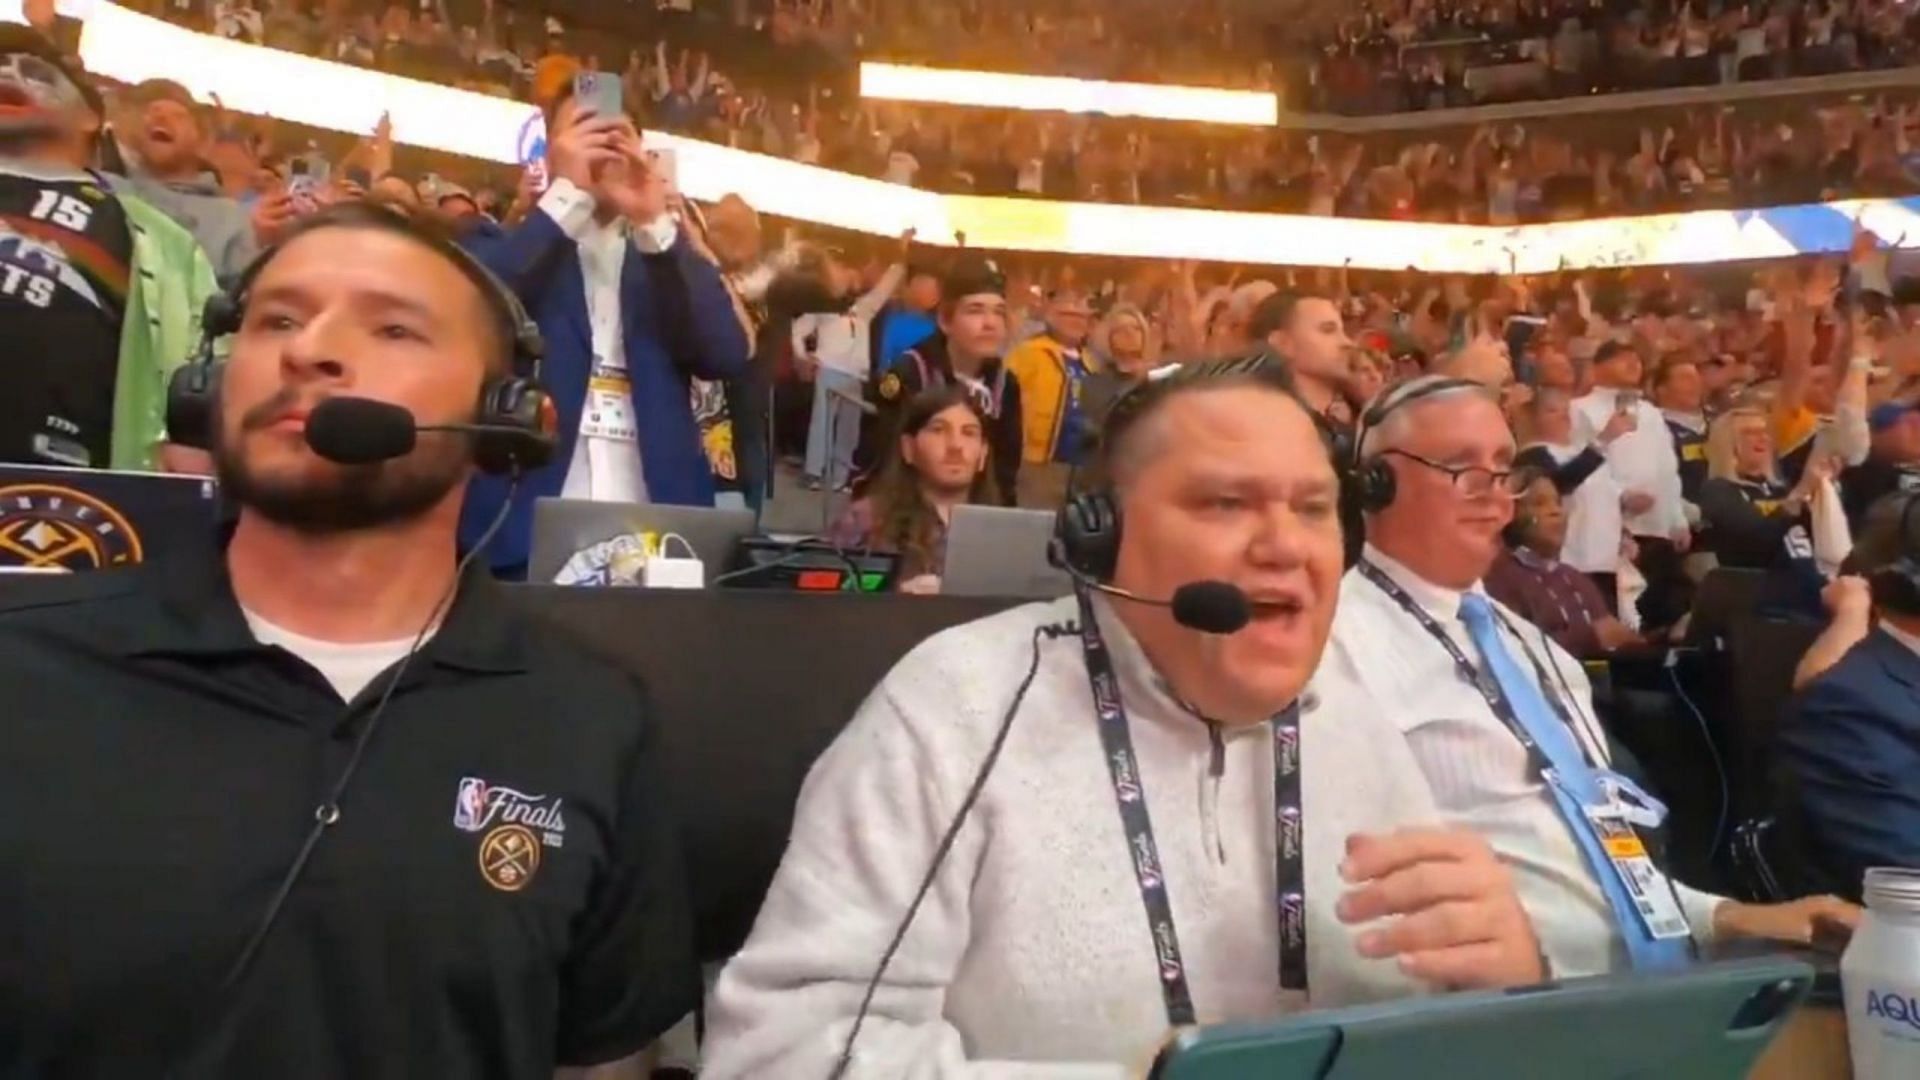 The Denver Nuggets radio announcers were emotional after the team won the NBA championship. (Photo: Jesse Trujillo/Twitter)